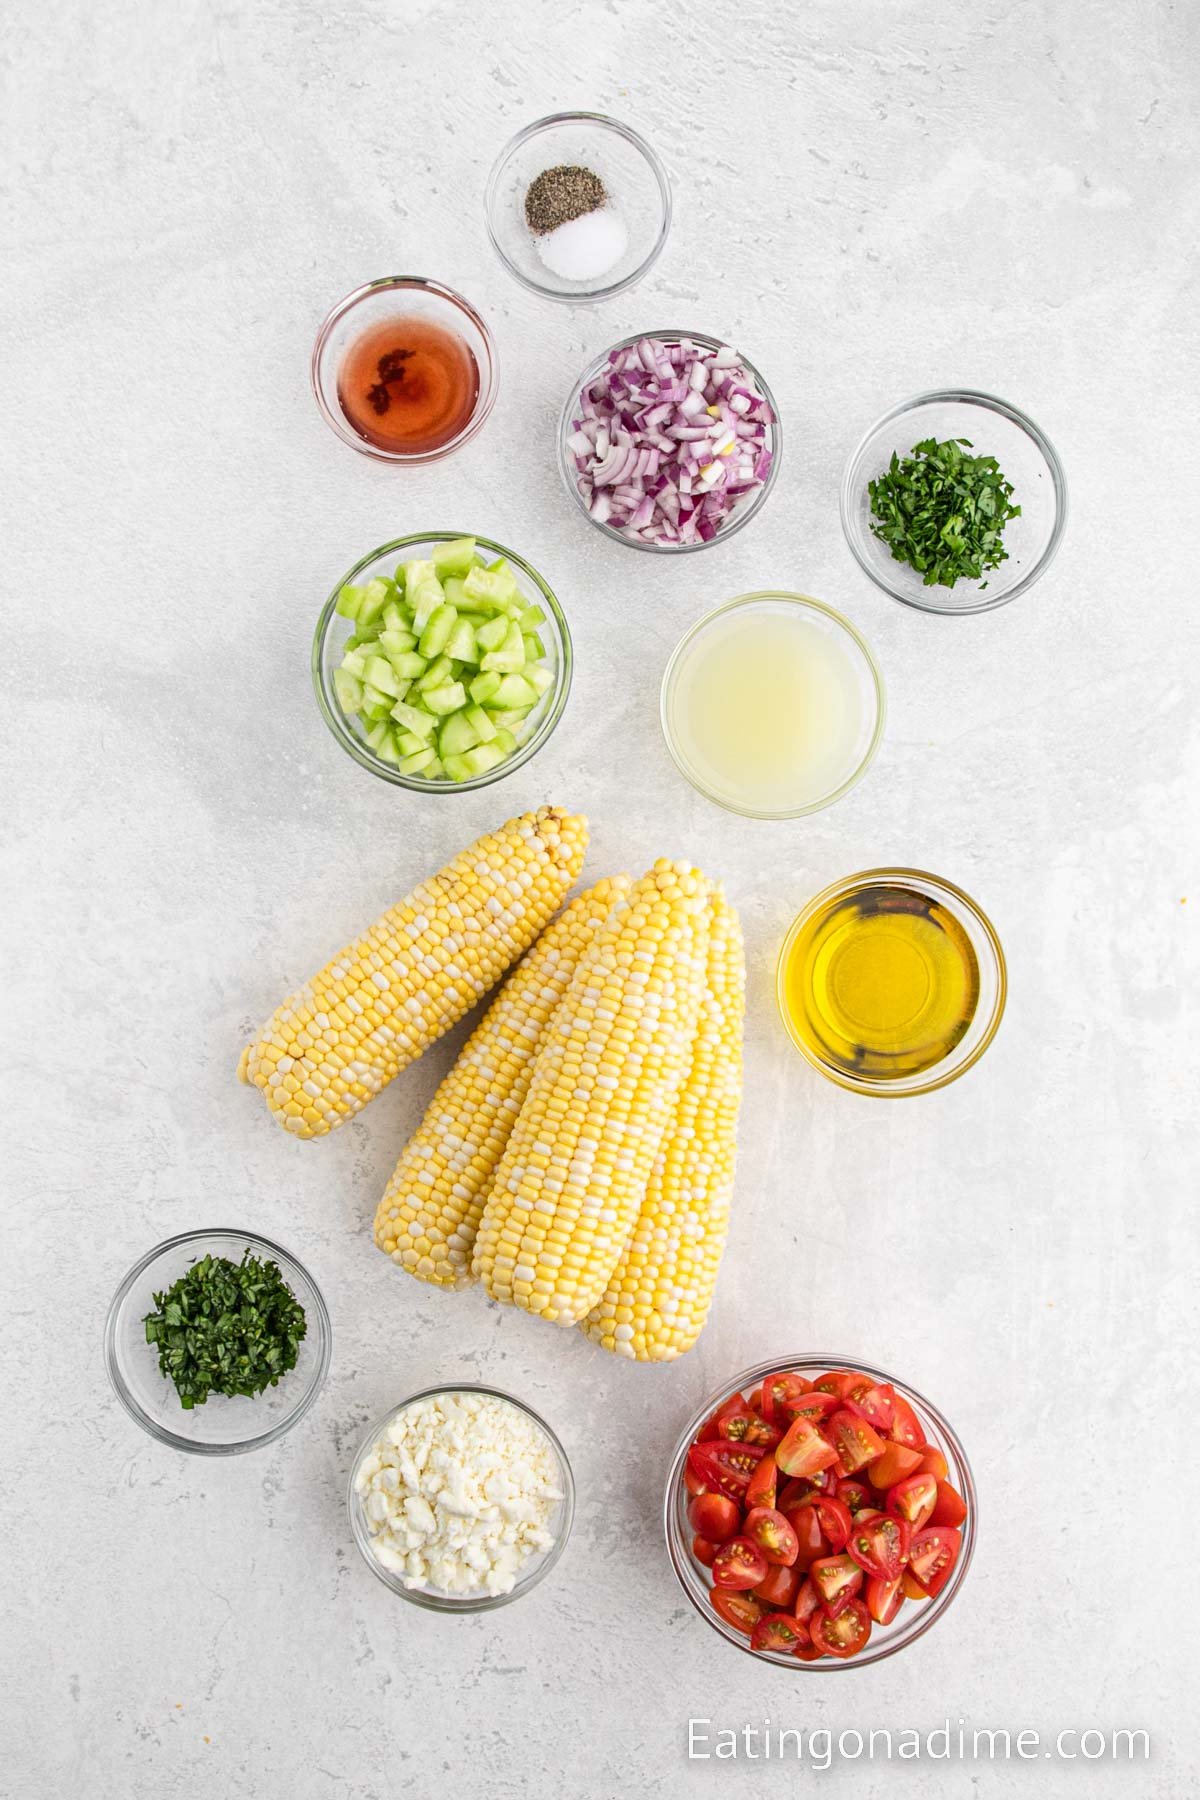 Ingredients needed to make corn salad - corn kernels, cherry tomatoes, small cucumber, red onion, fresh basil, fresh parsley, feta cheese, olive oil, red wine vinegar, salt and pepper